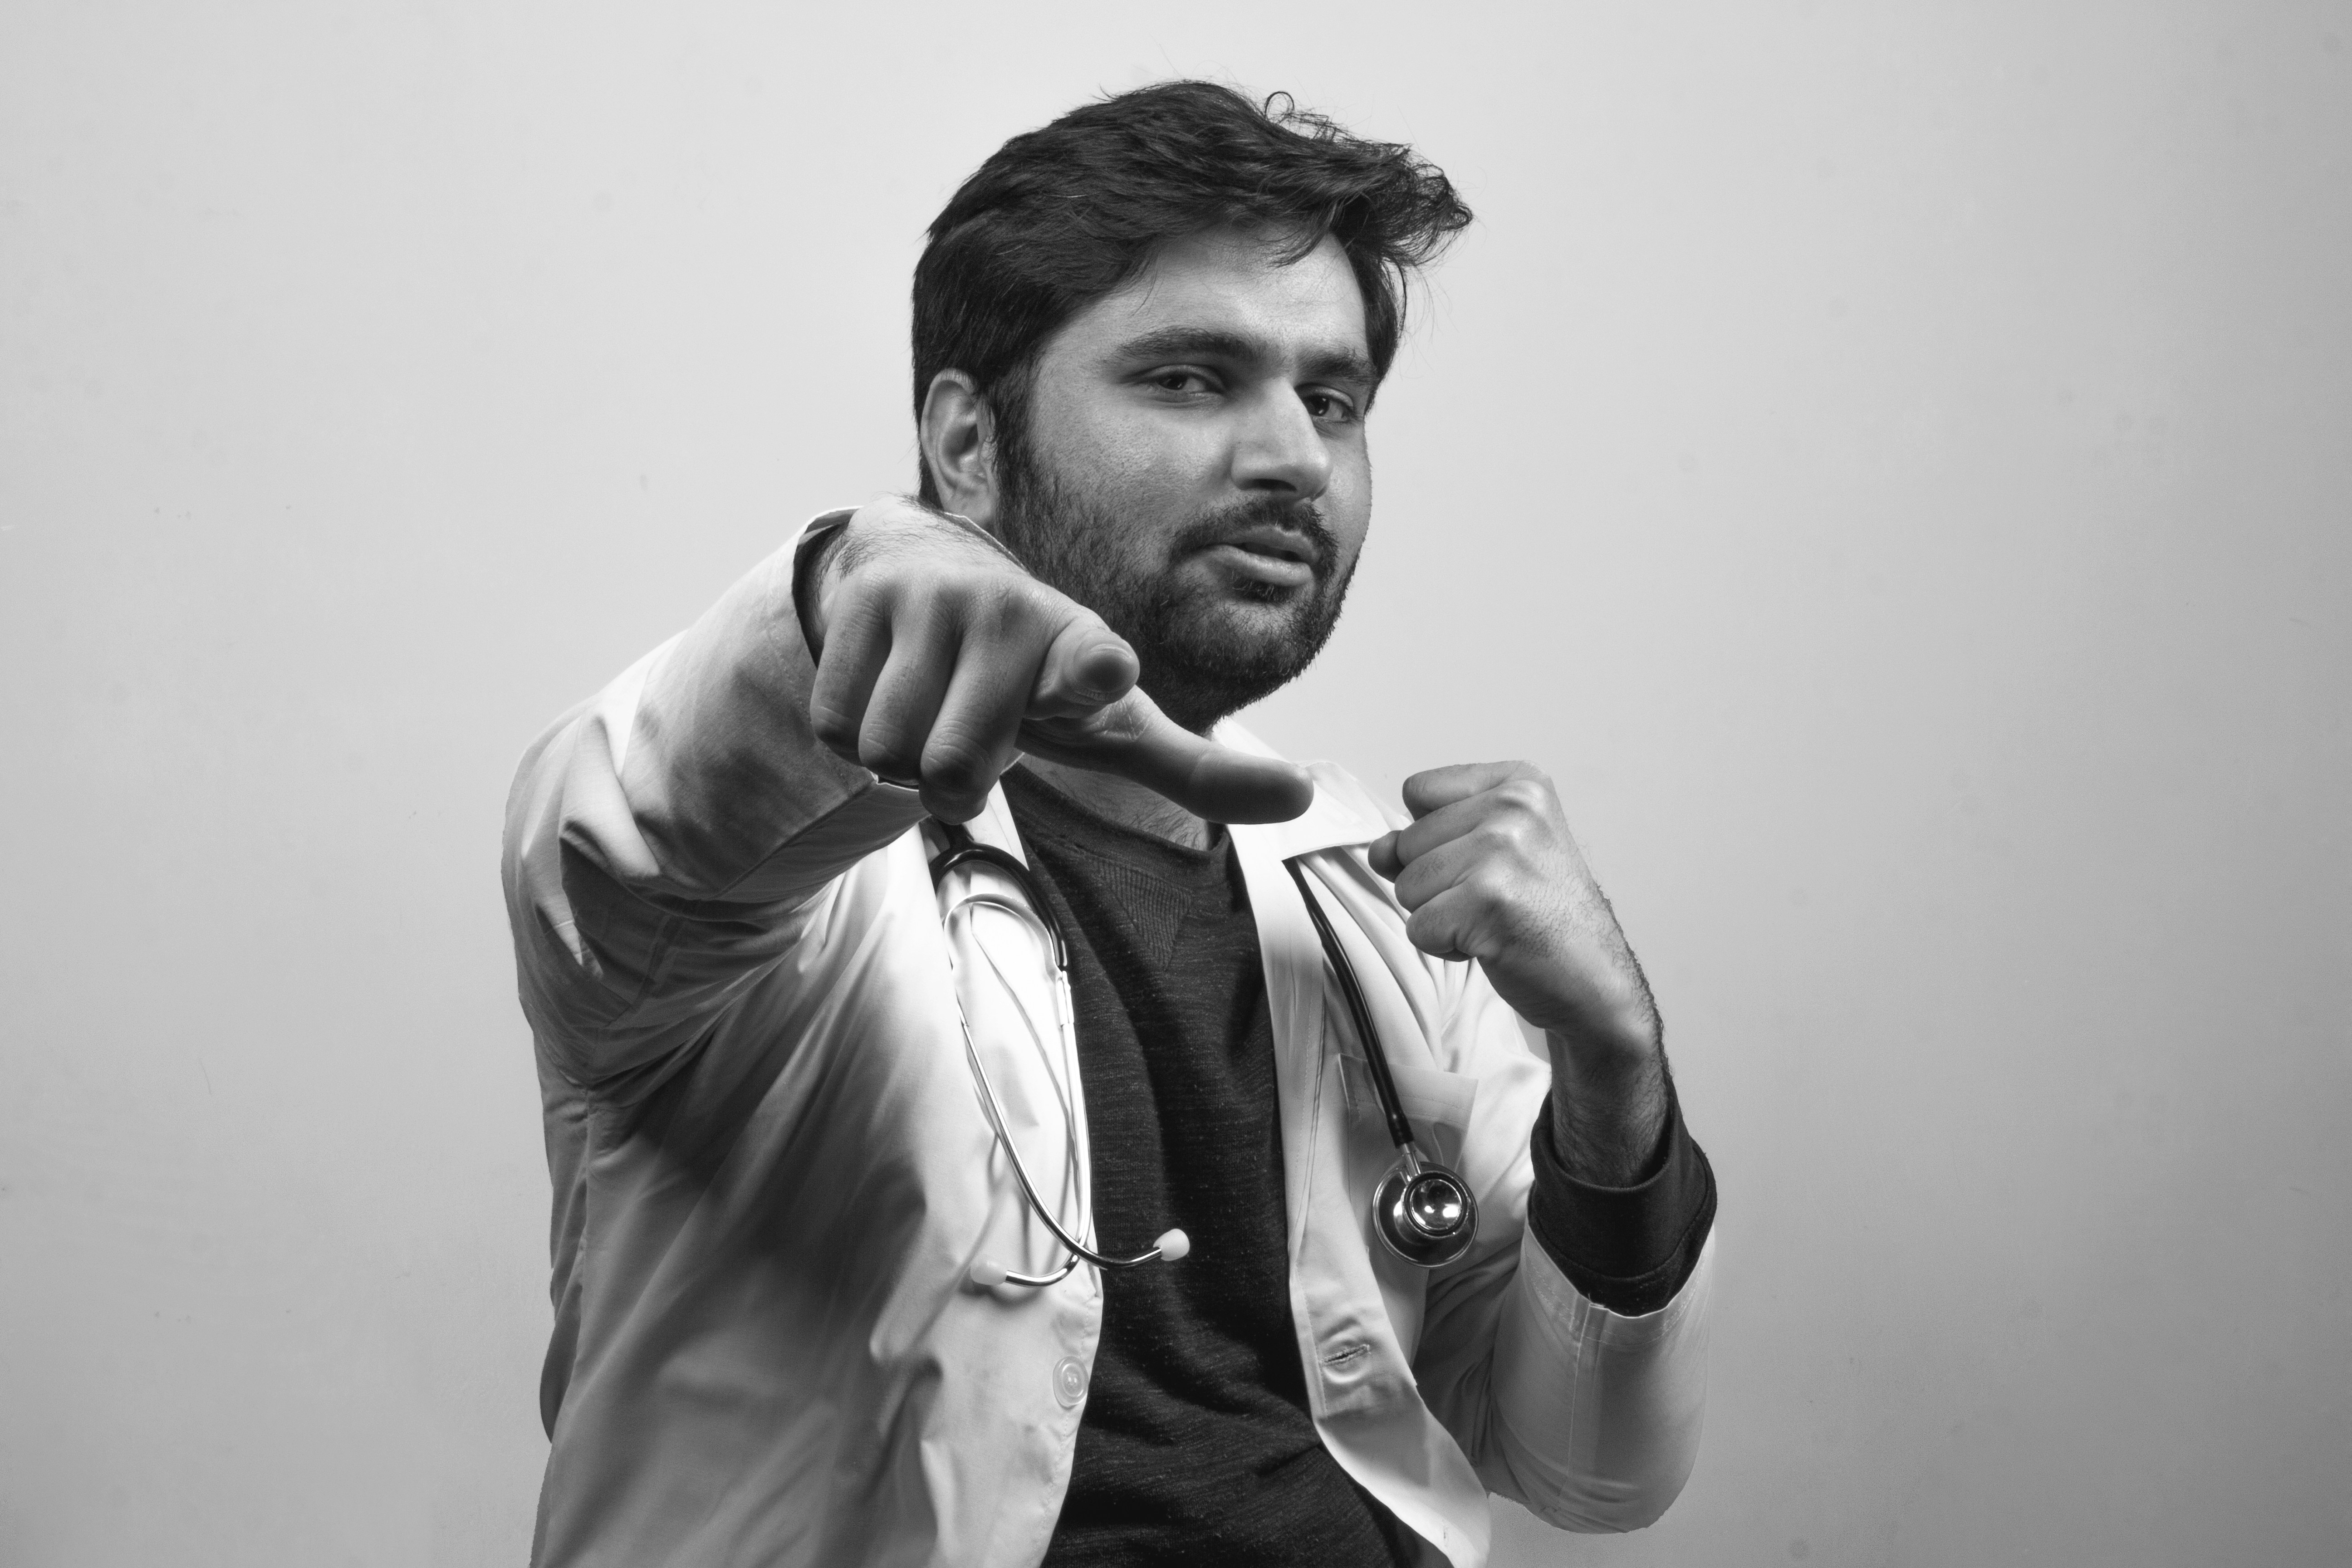 A doctor with joyful gesture pointing and punching forward - Black and White